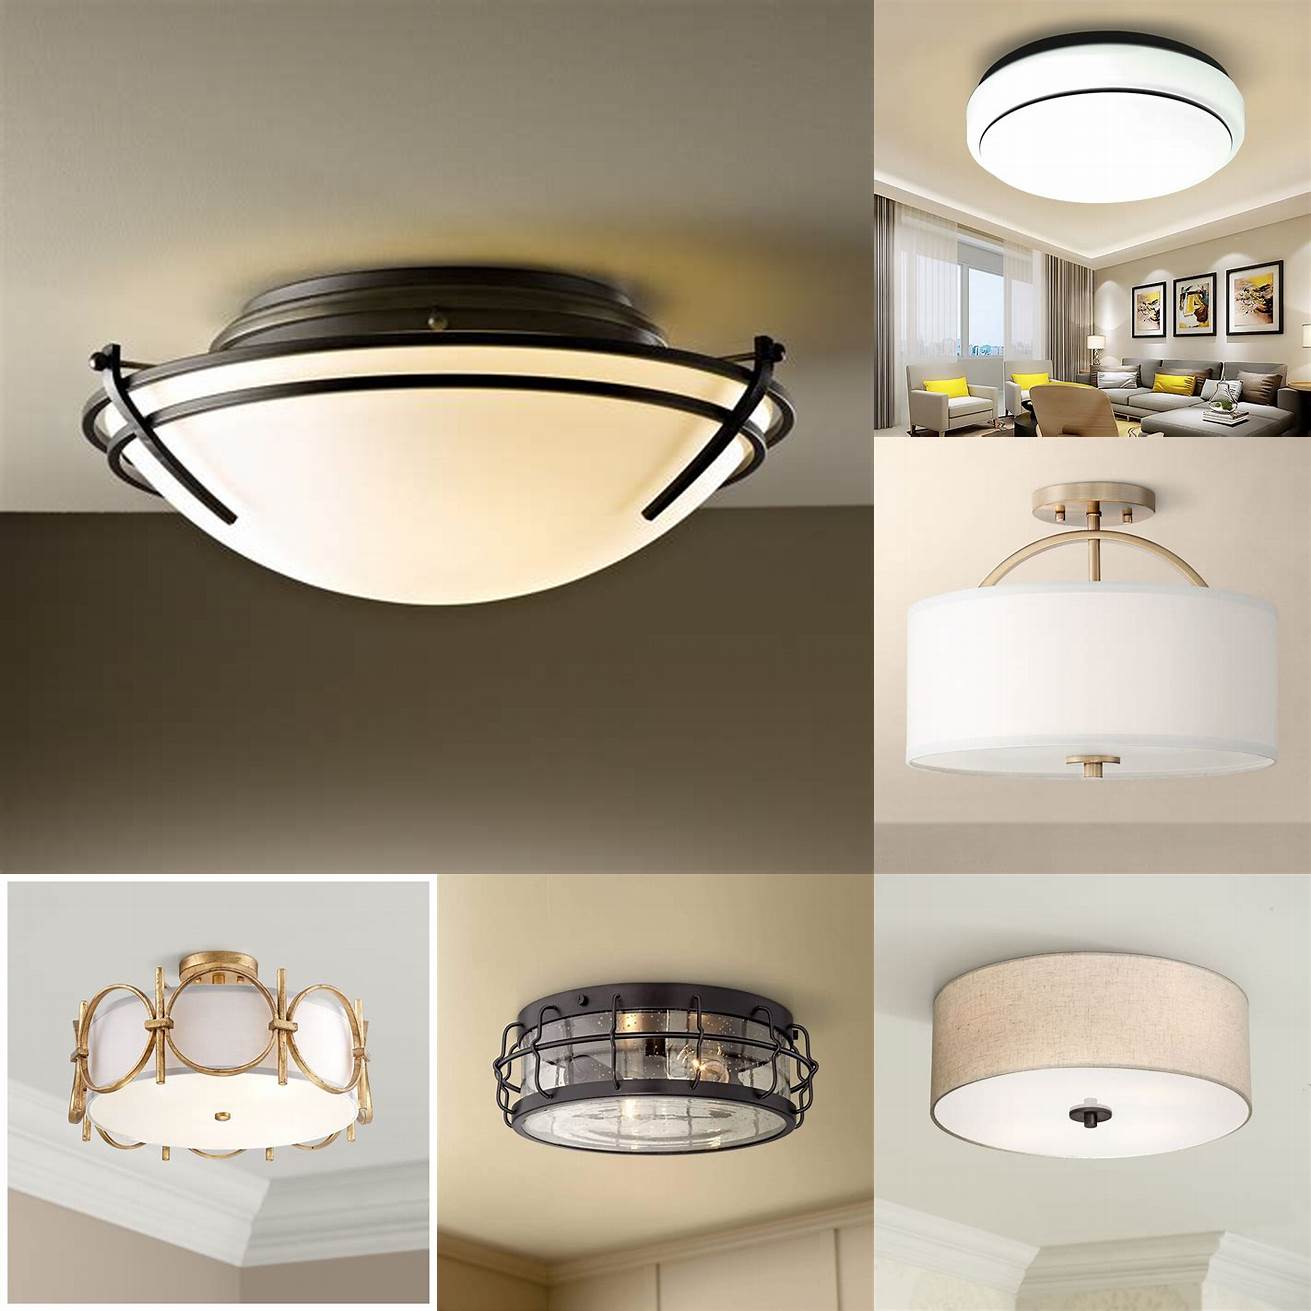 Ceiling mount fixtures for low ceilings